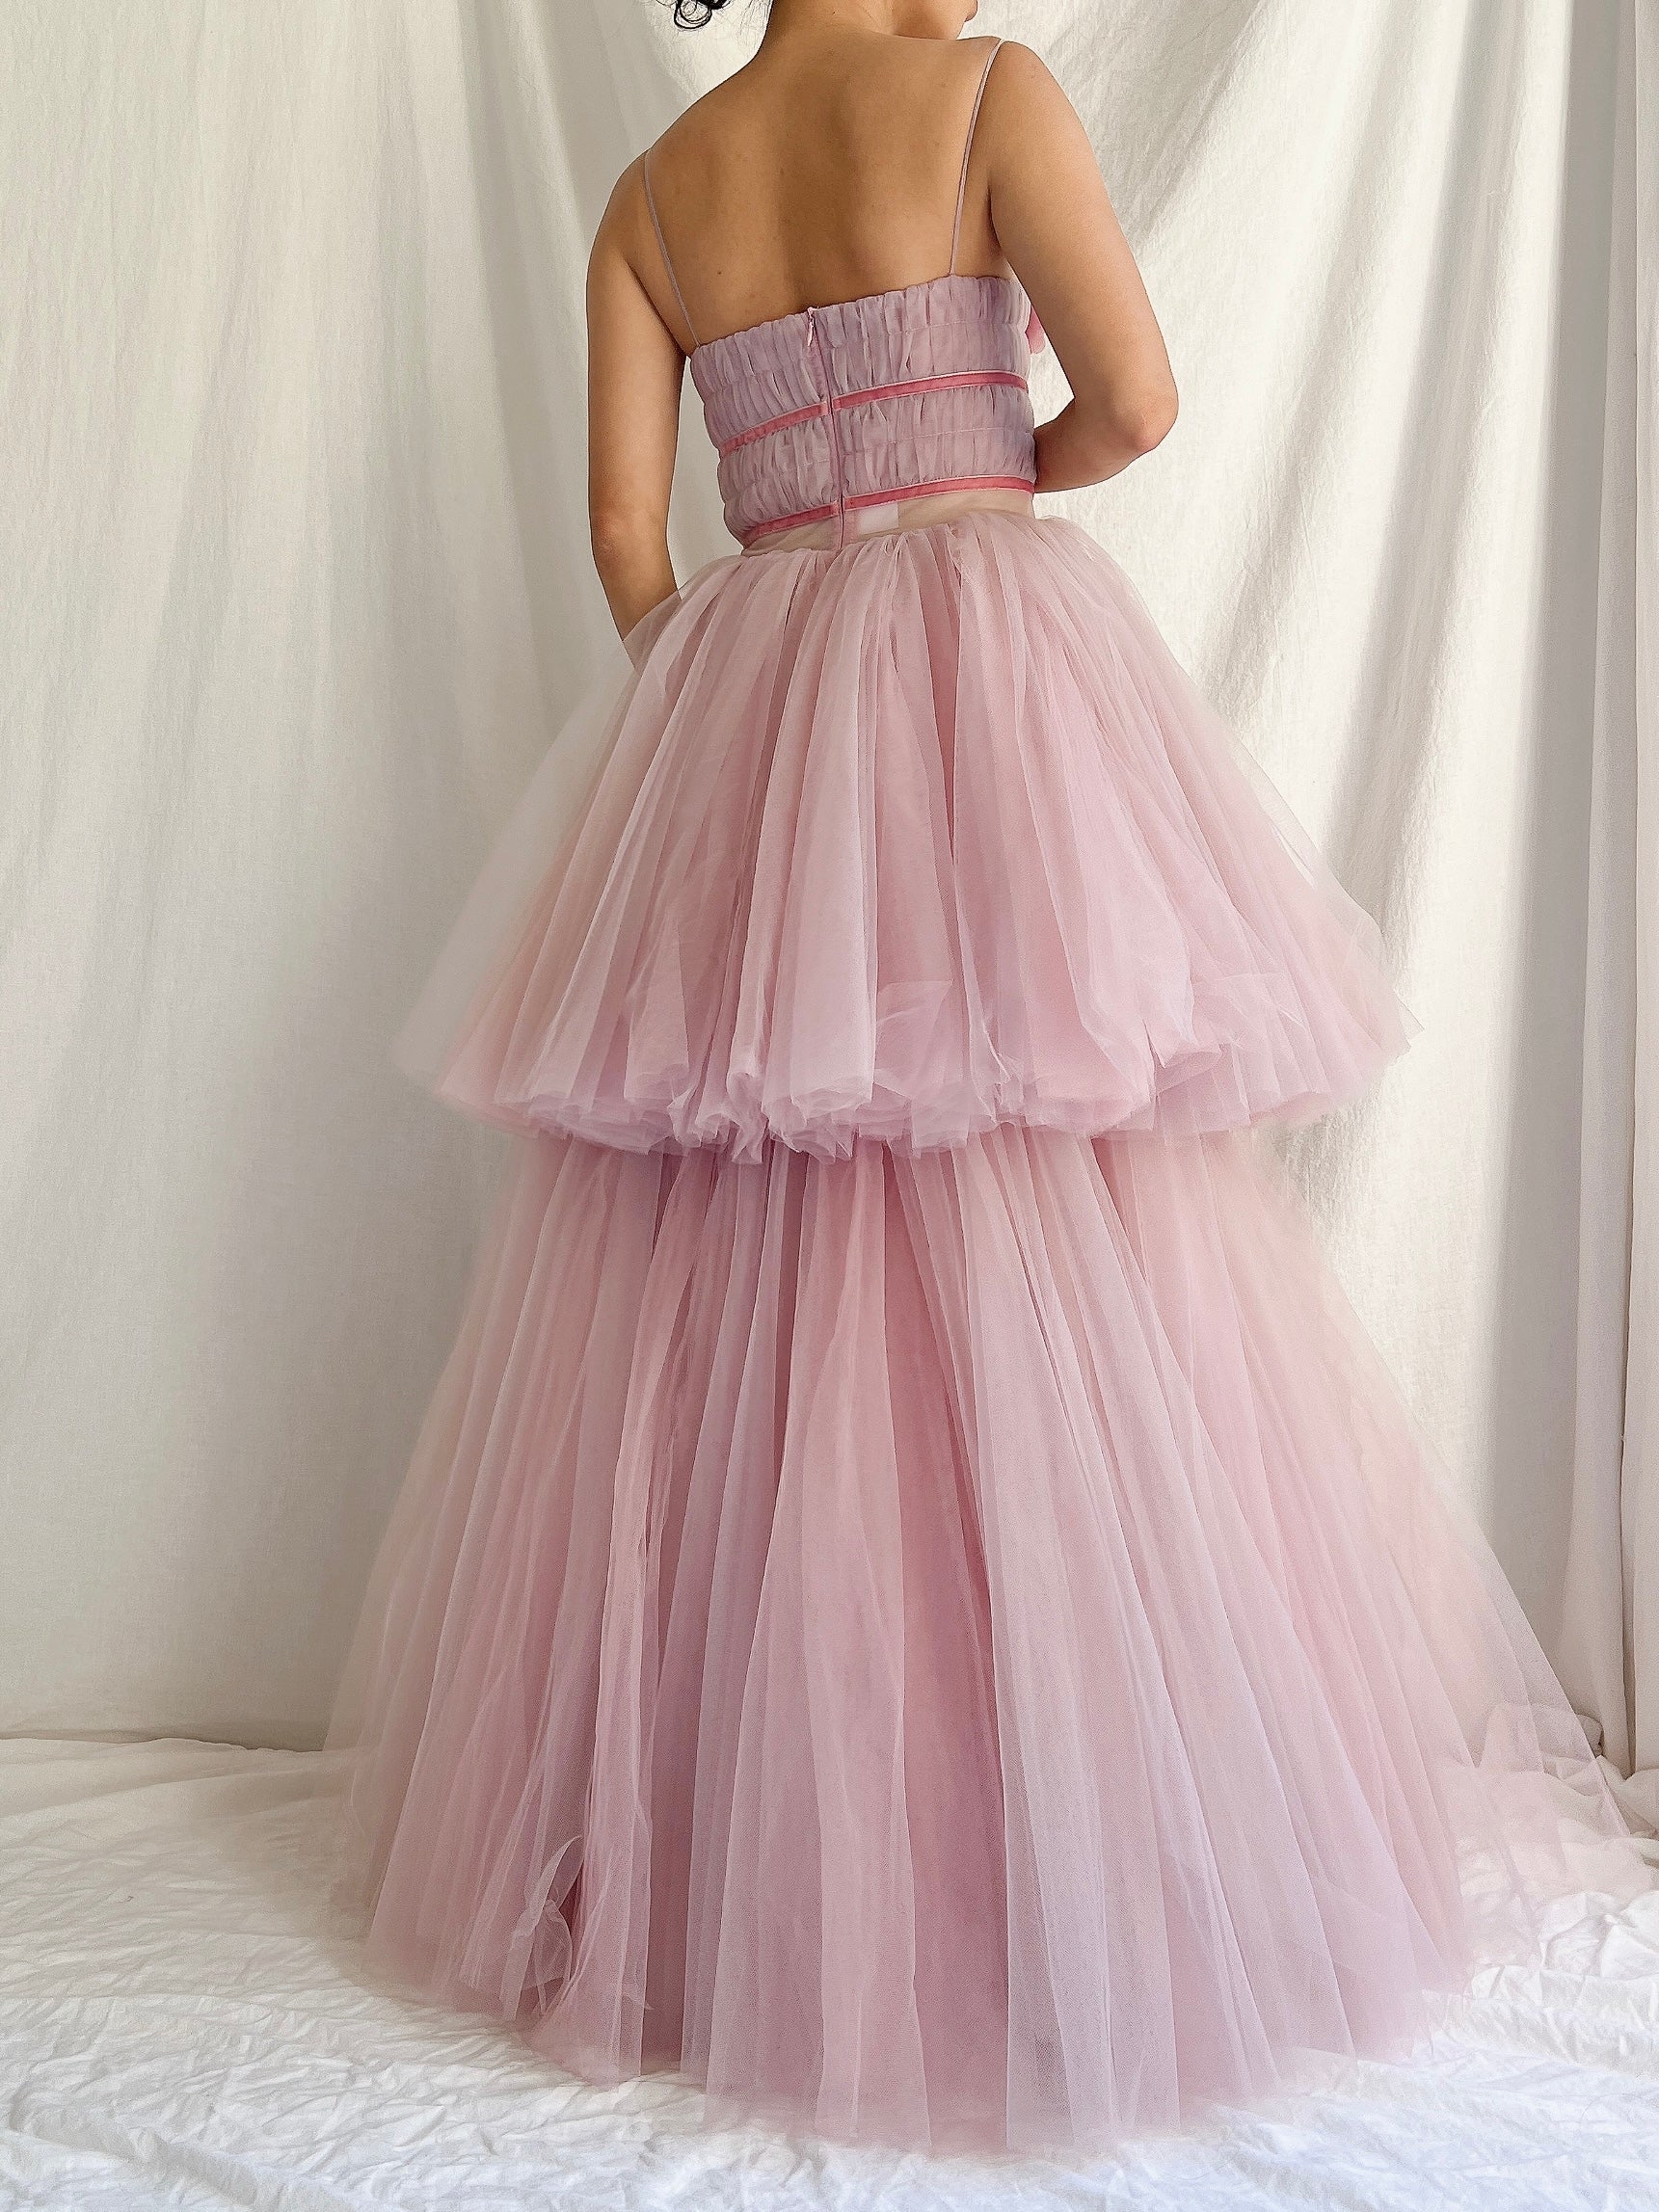 Lilac Tulle Layered Dress - 0/2 | G O S S A M E R